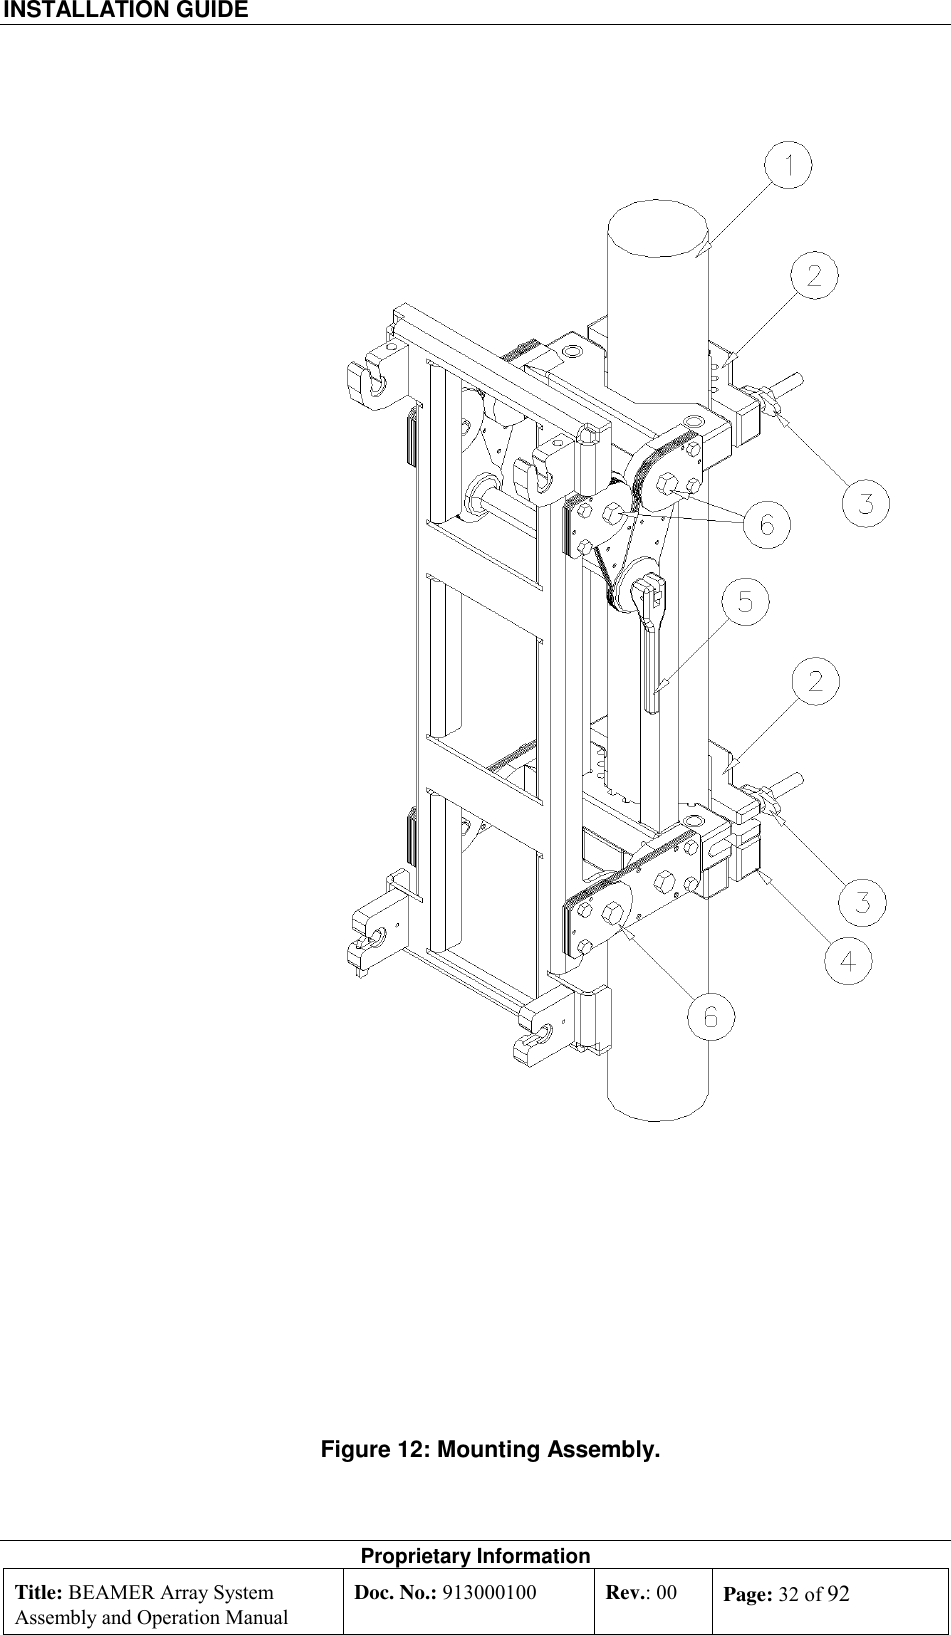 INSTALLATION GUIDE    Proprietary Information Title: BEAMER Array System Assembly and Operation Manual Doc. No.: 913000100  Rev.: 00  Page: 32 of 92        Figure 12: Mounting Assembly.  